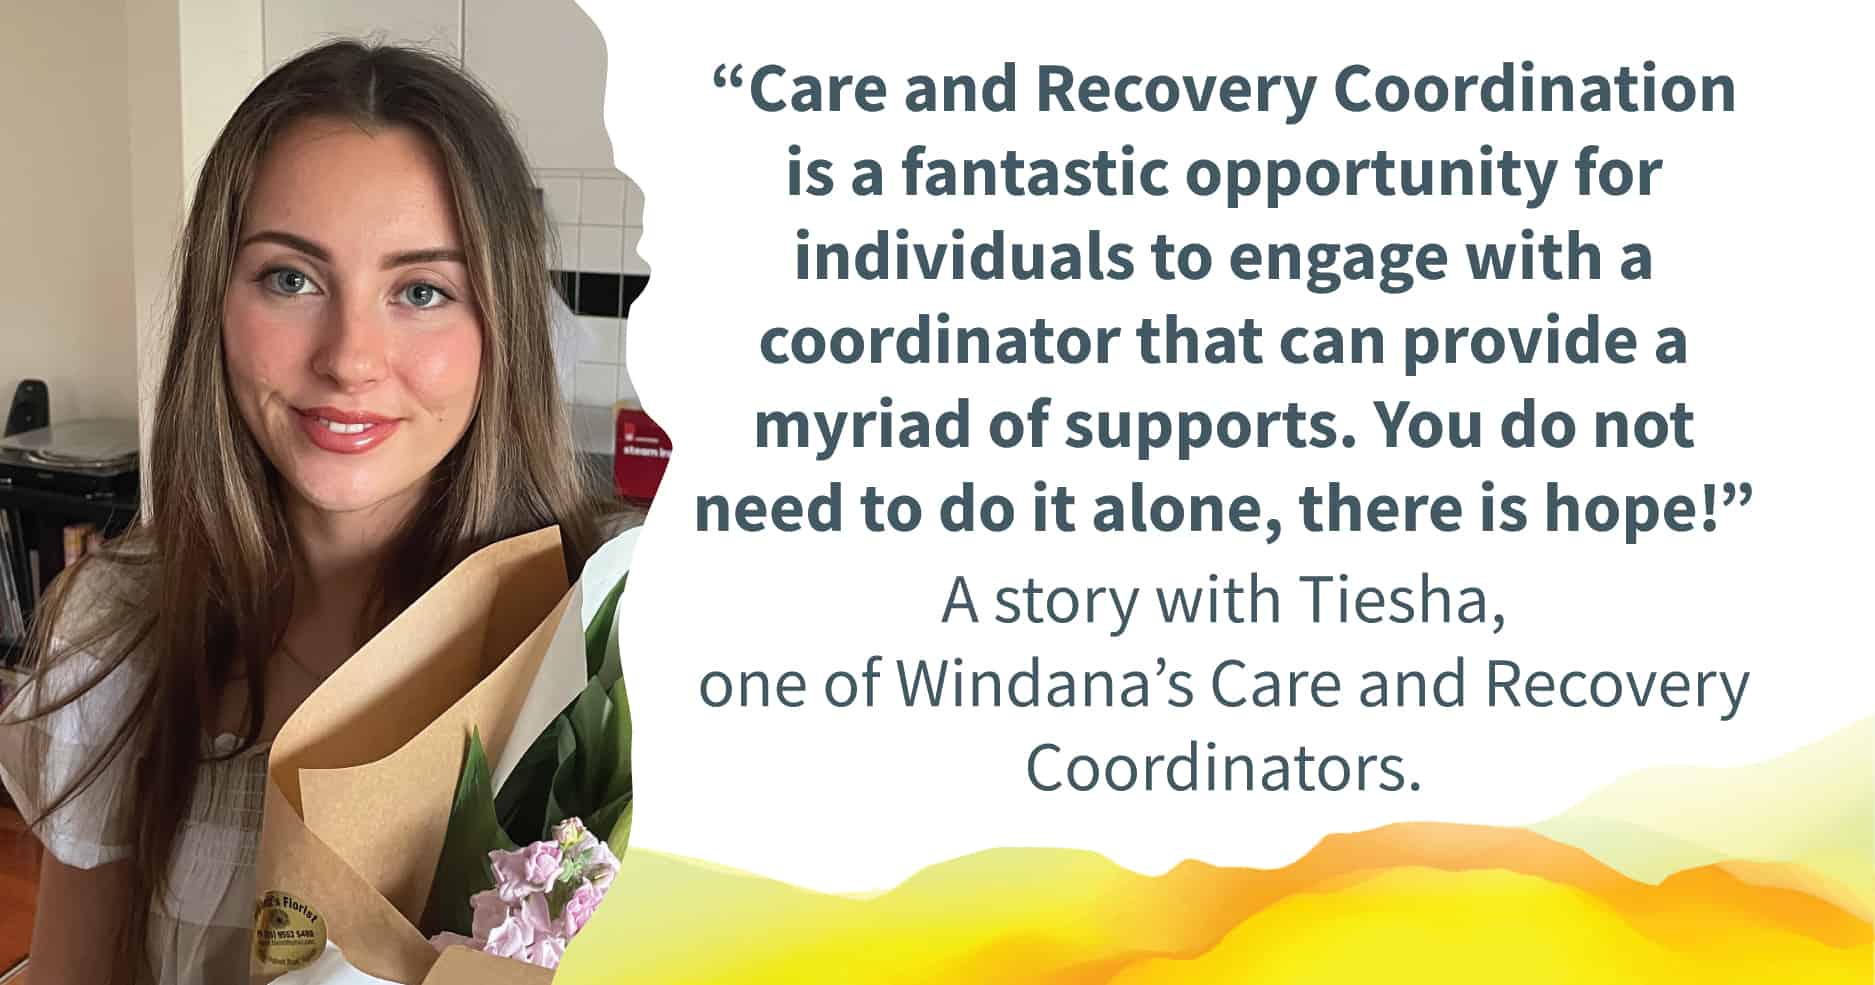 Tiesha smiling. Quote alongside reads: “Care and Recovery Coordination is a fantastic opportunity for individuals to engage with a coordinator that can provide a myriad of supports. You do not need to do it alone, there is hope!”. Text below reads: "A story with Tiesha, one of Windana's Care and Recovery Coordinators.